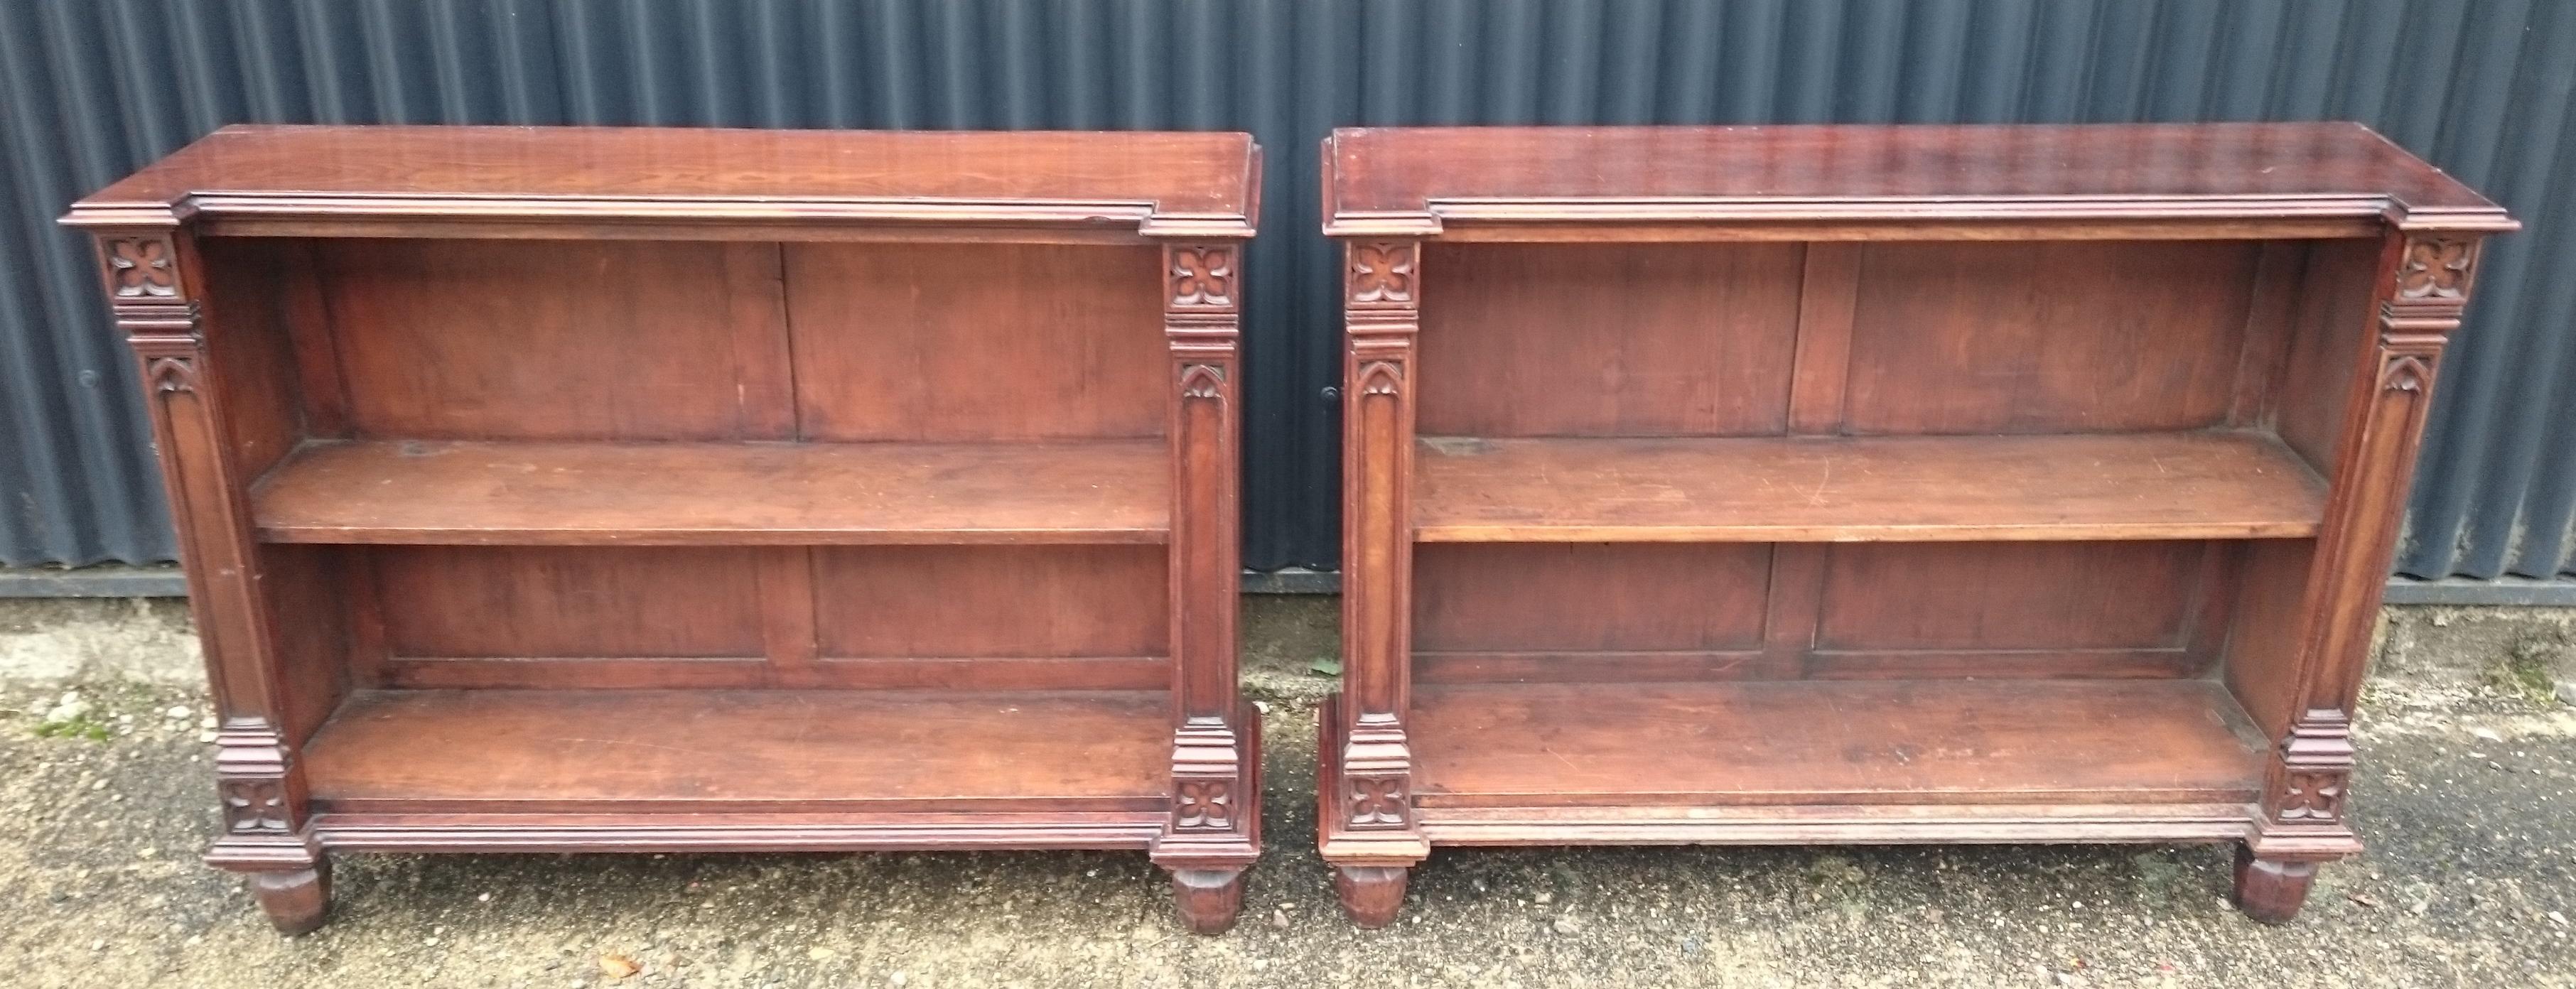 Mahogany Pair of Early 19th Century Bookcases For Sale